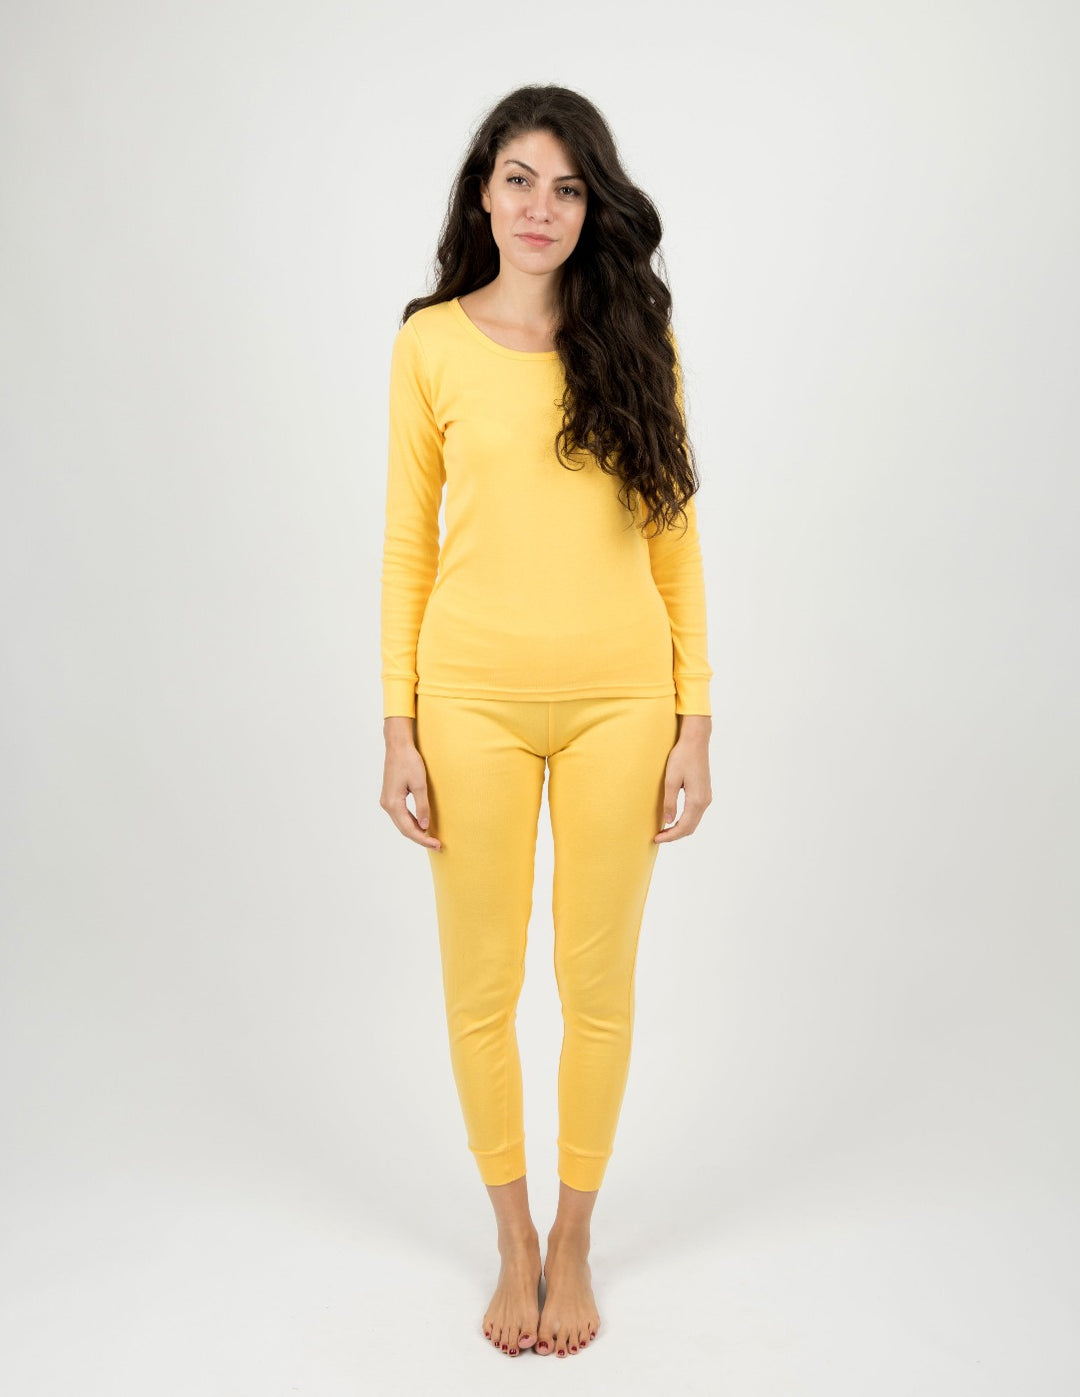 solid color yellow women's cotton pajama